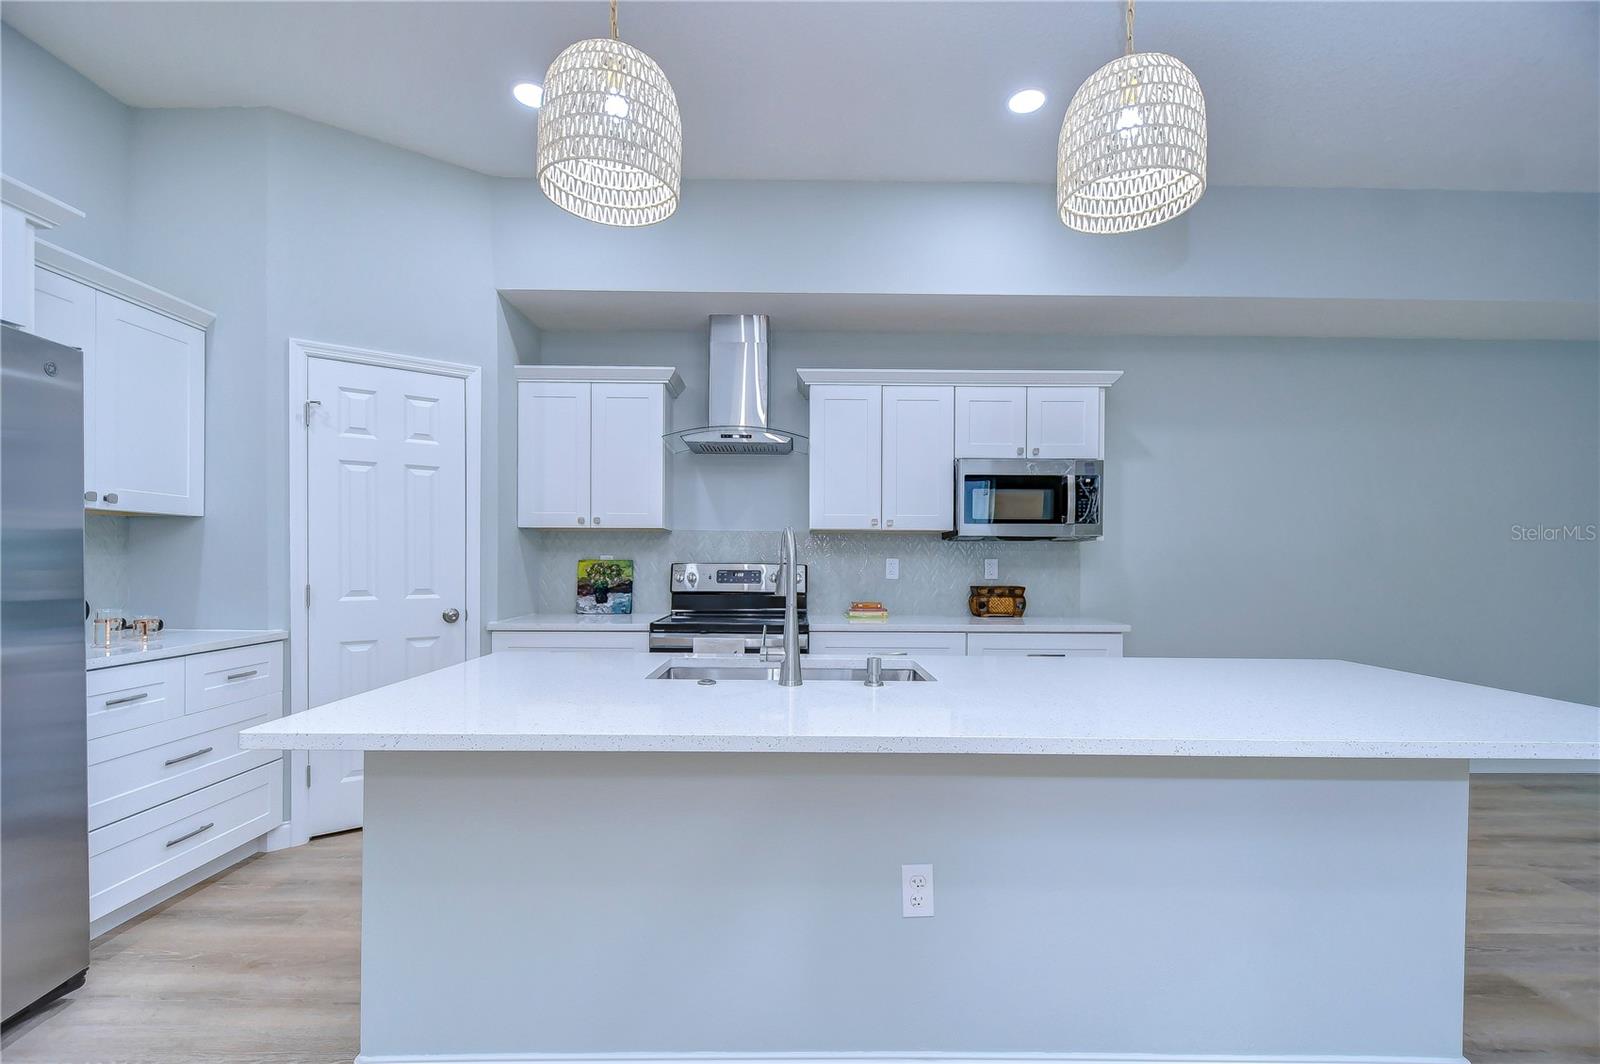 Tons of work space, an abundance of cabinets and drawers, and the walk-in corner panty are sure to delight the cook!